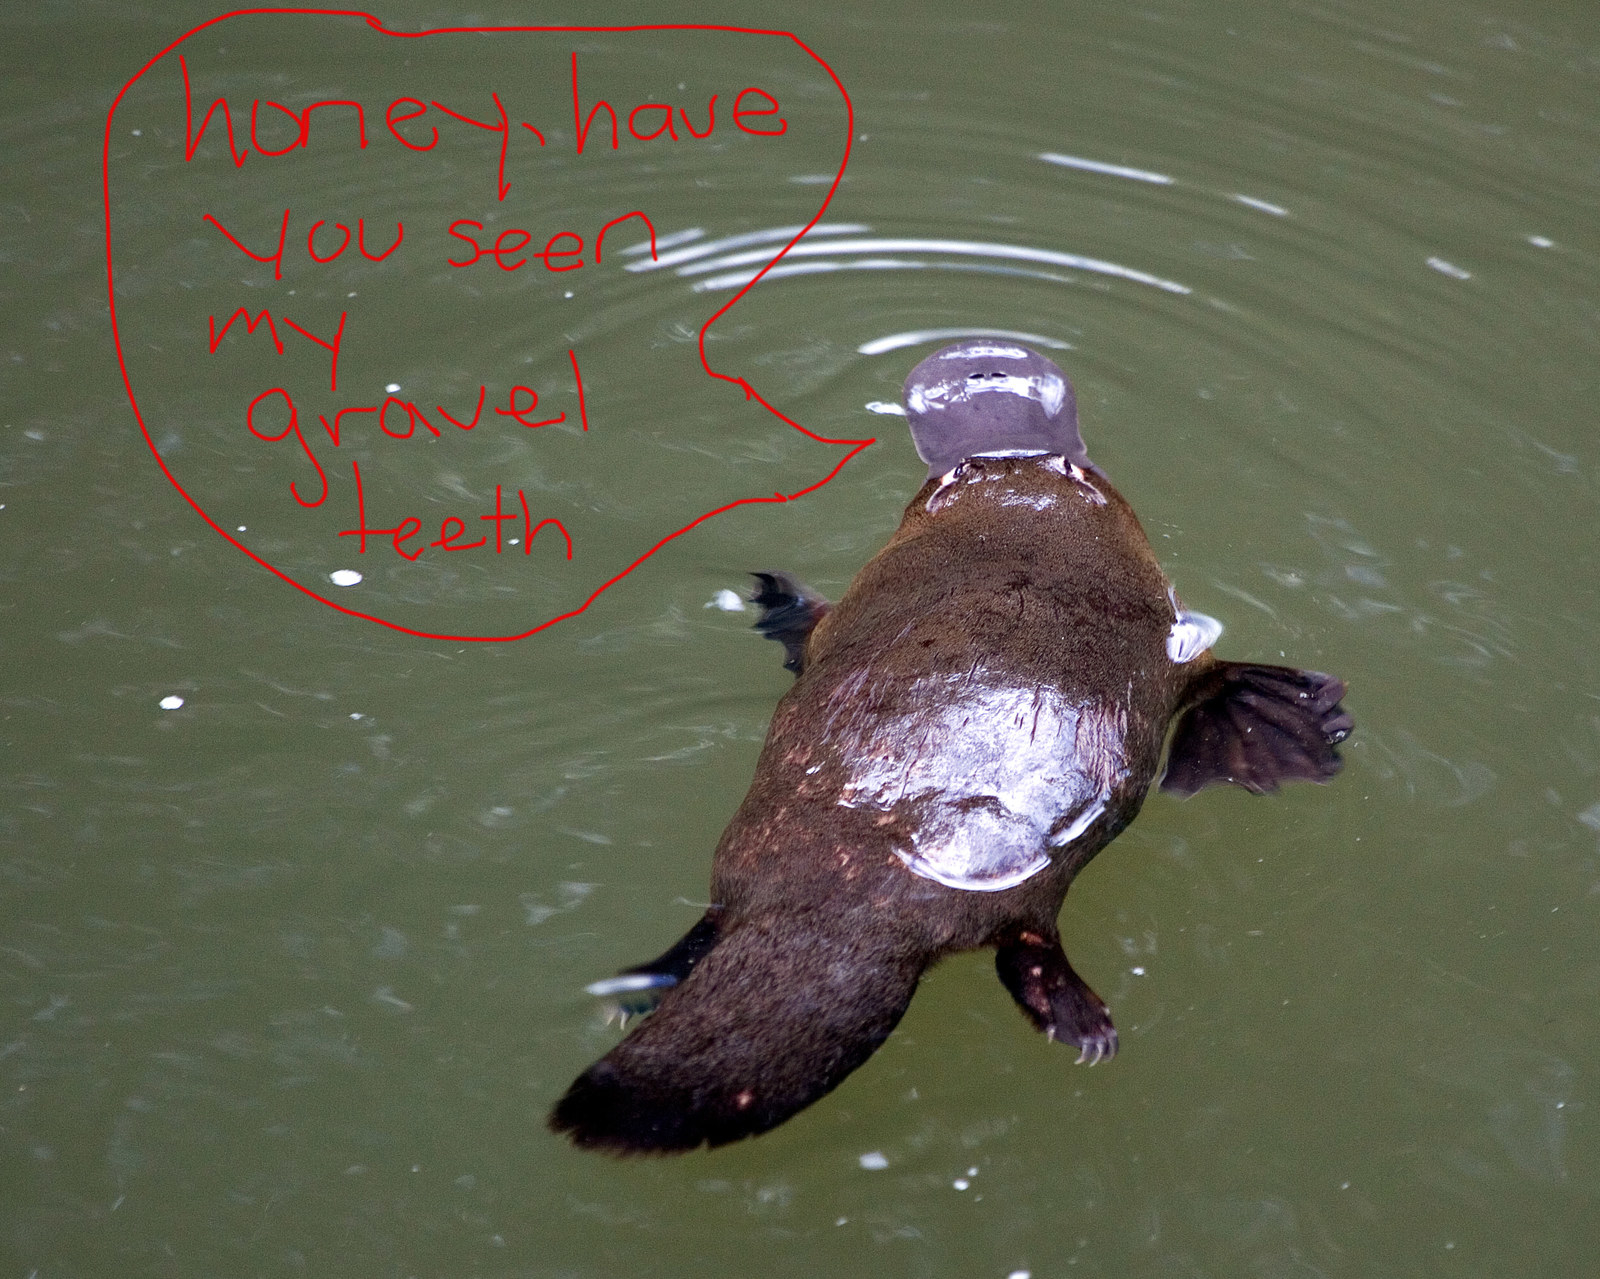 platypus lay eggs or not